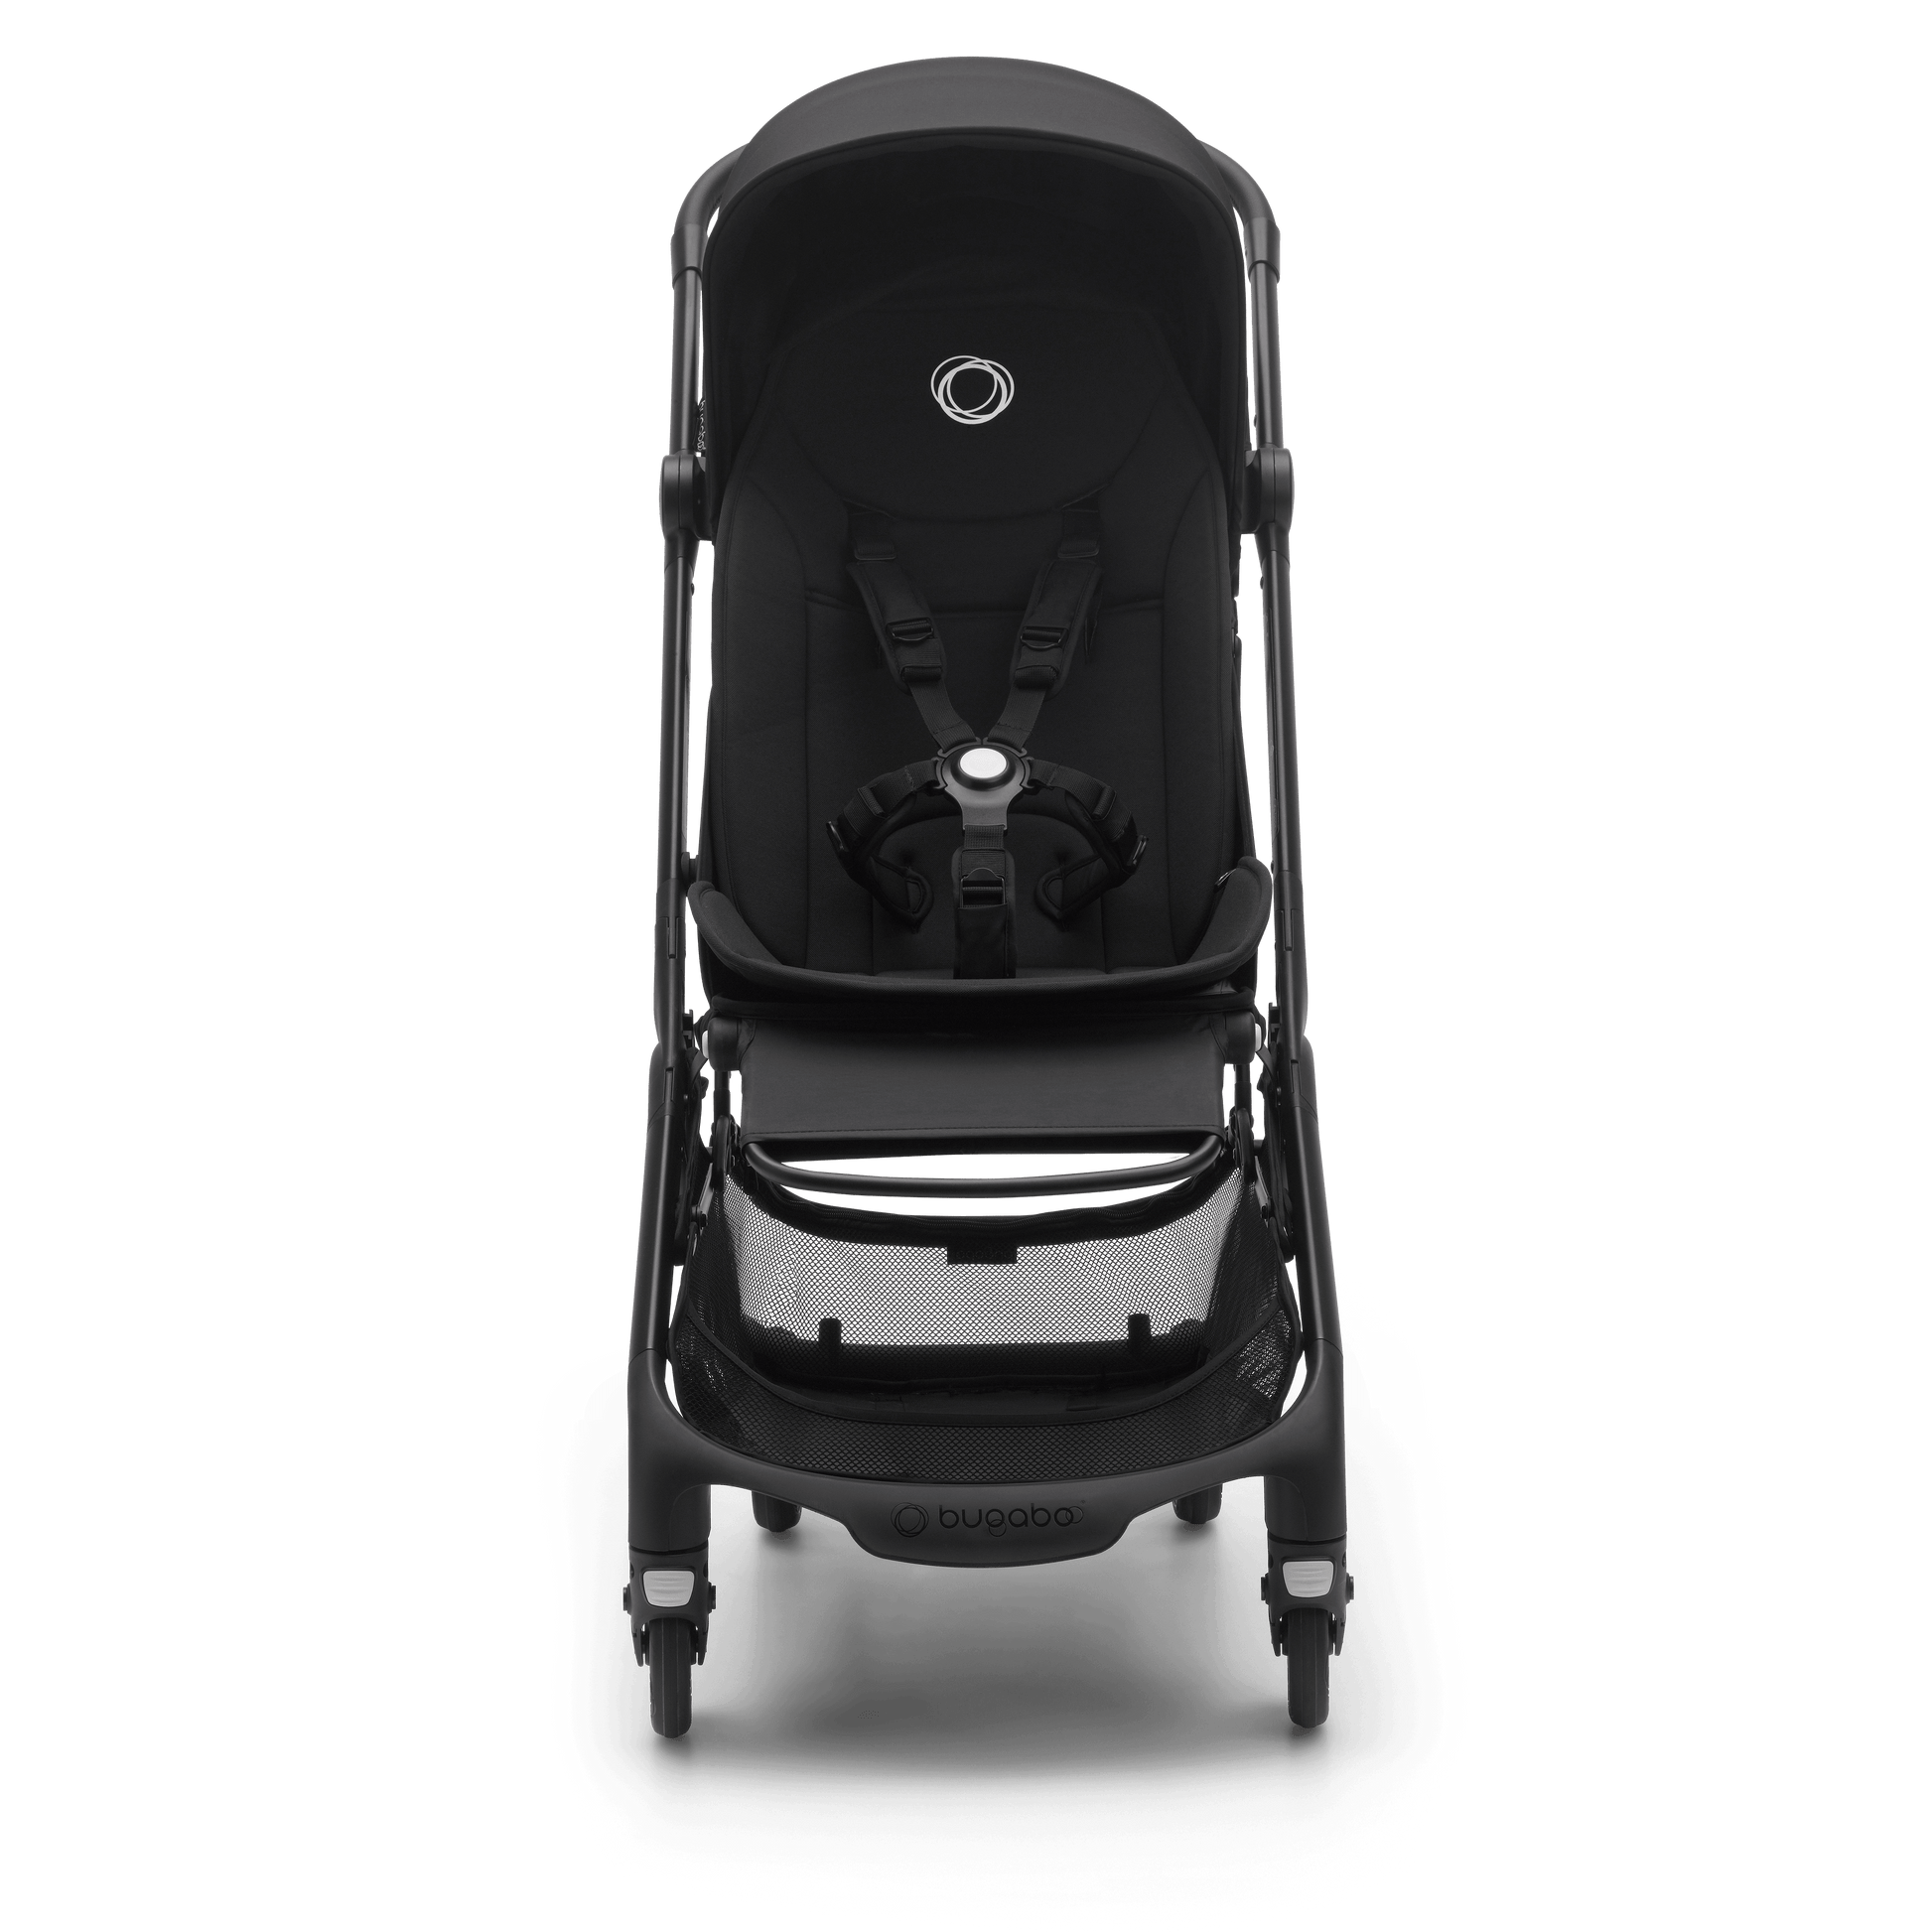 Bugaboo Butterfly Stroller - Midnight Black - Traveling Tikes 